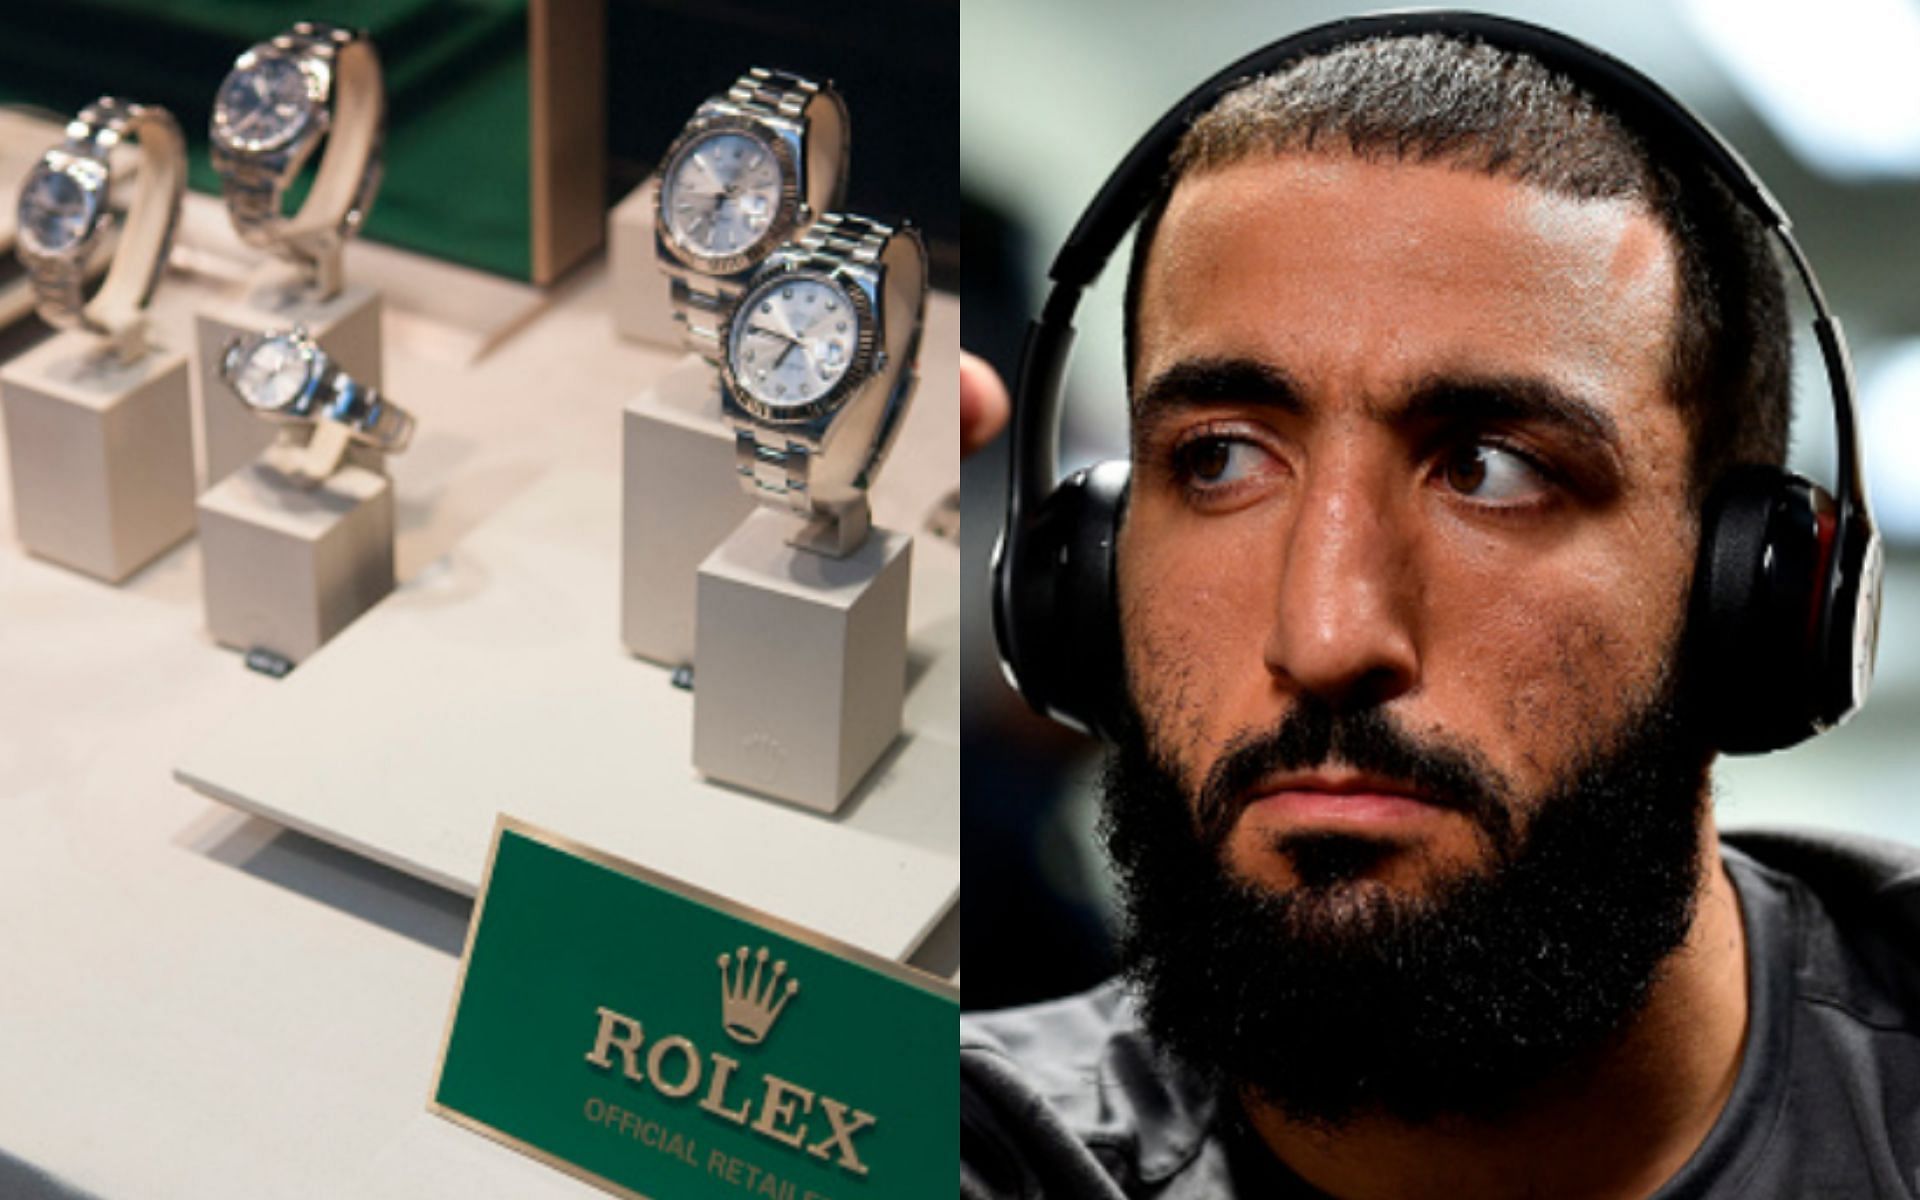 Rolex watches (left); Belal Muhammad (right)